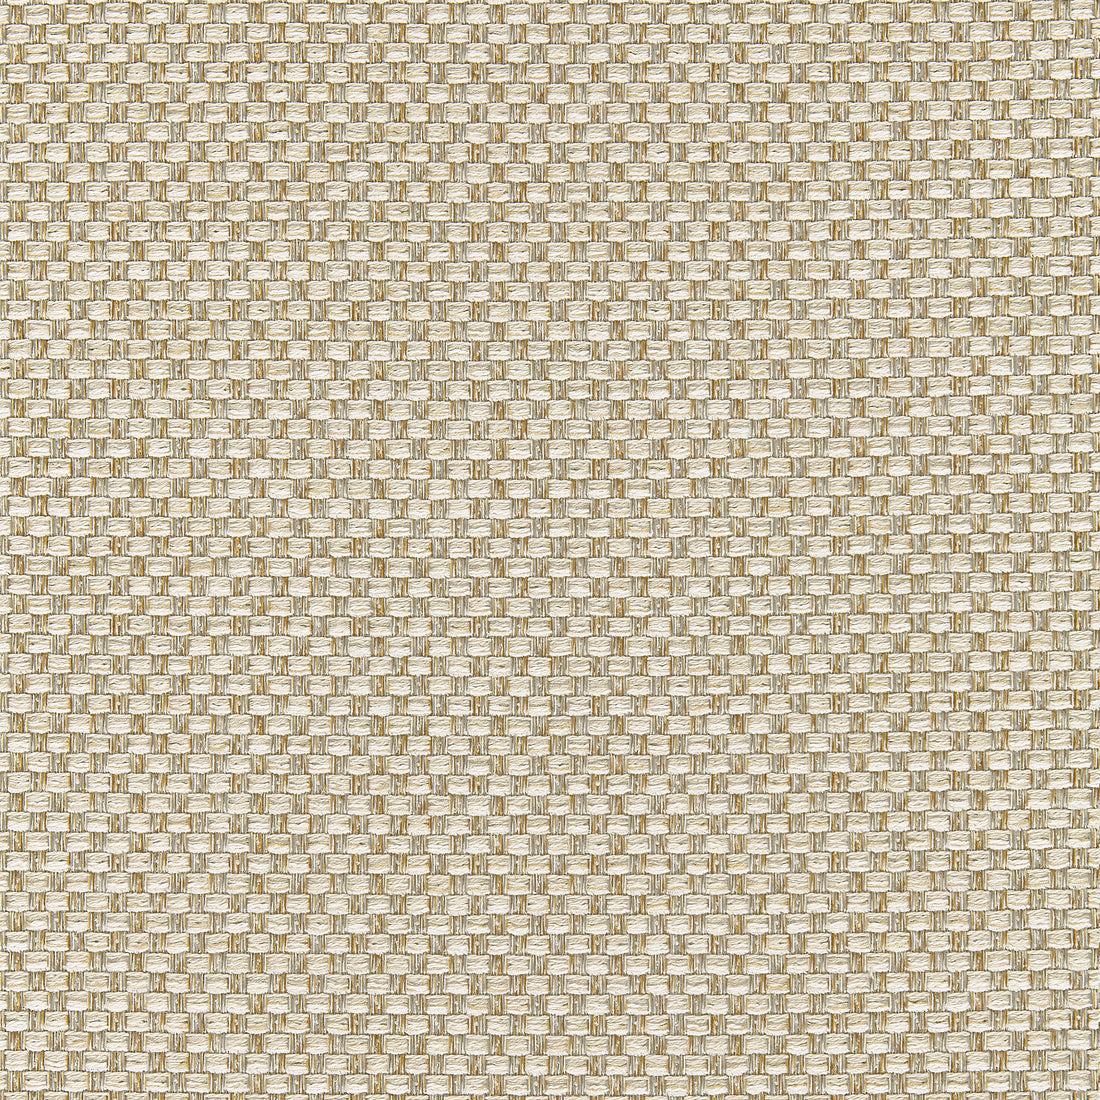 Palmetto fabric in almond color - pattern number W80229 - by Thibaut in the Kaleidoscope Fabrics collection